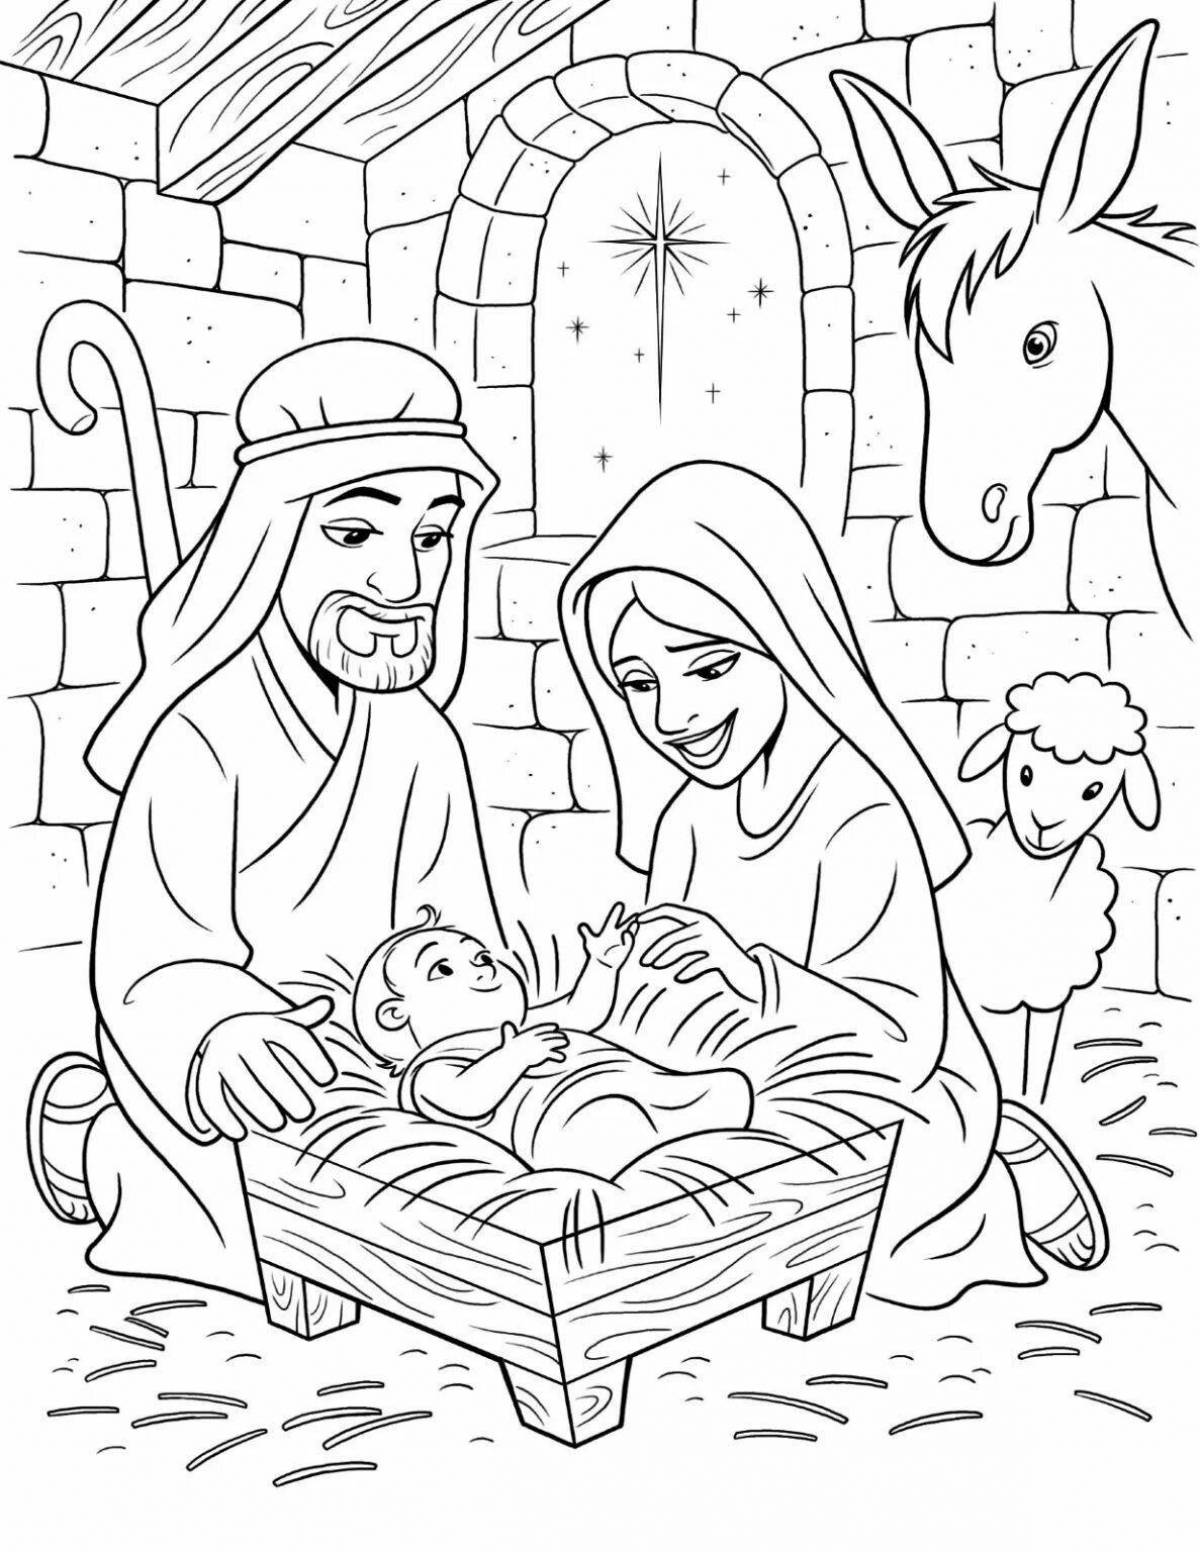 Christmas colorful coloring for children orthodoxy